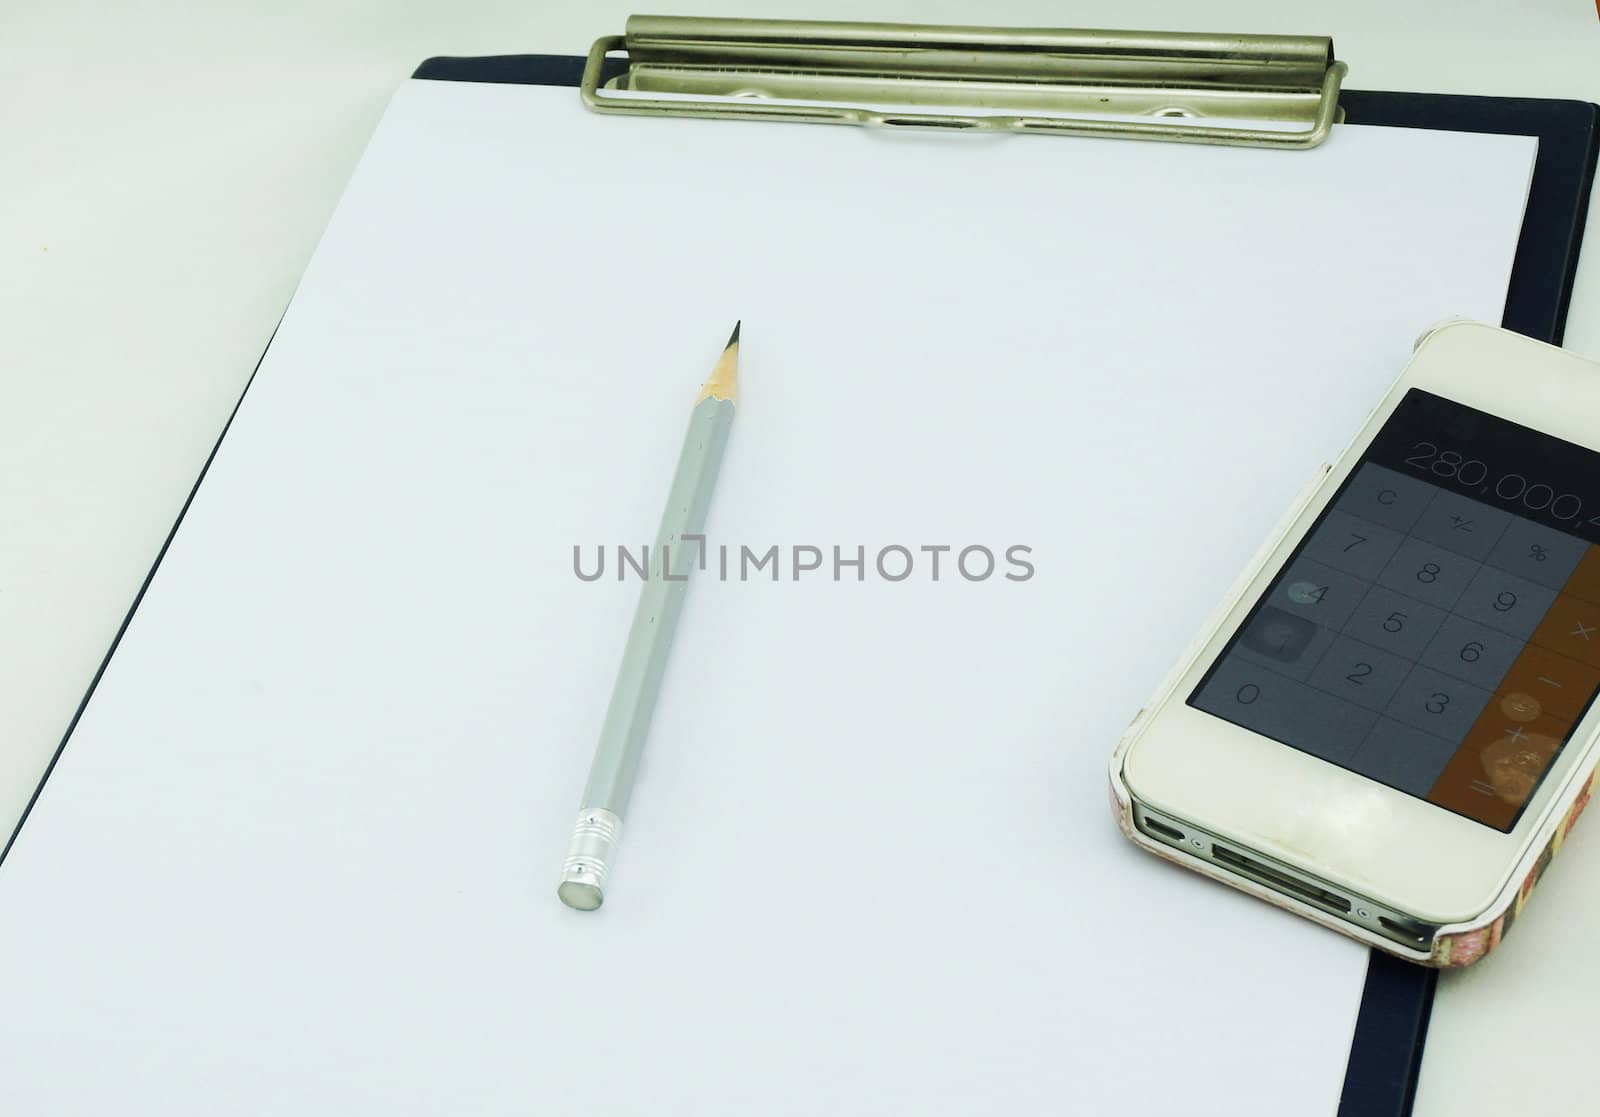 The white paper laid on board for writing notes. Top with a pencil and calculator.                               